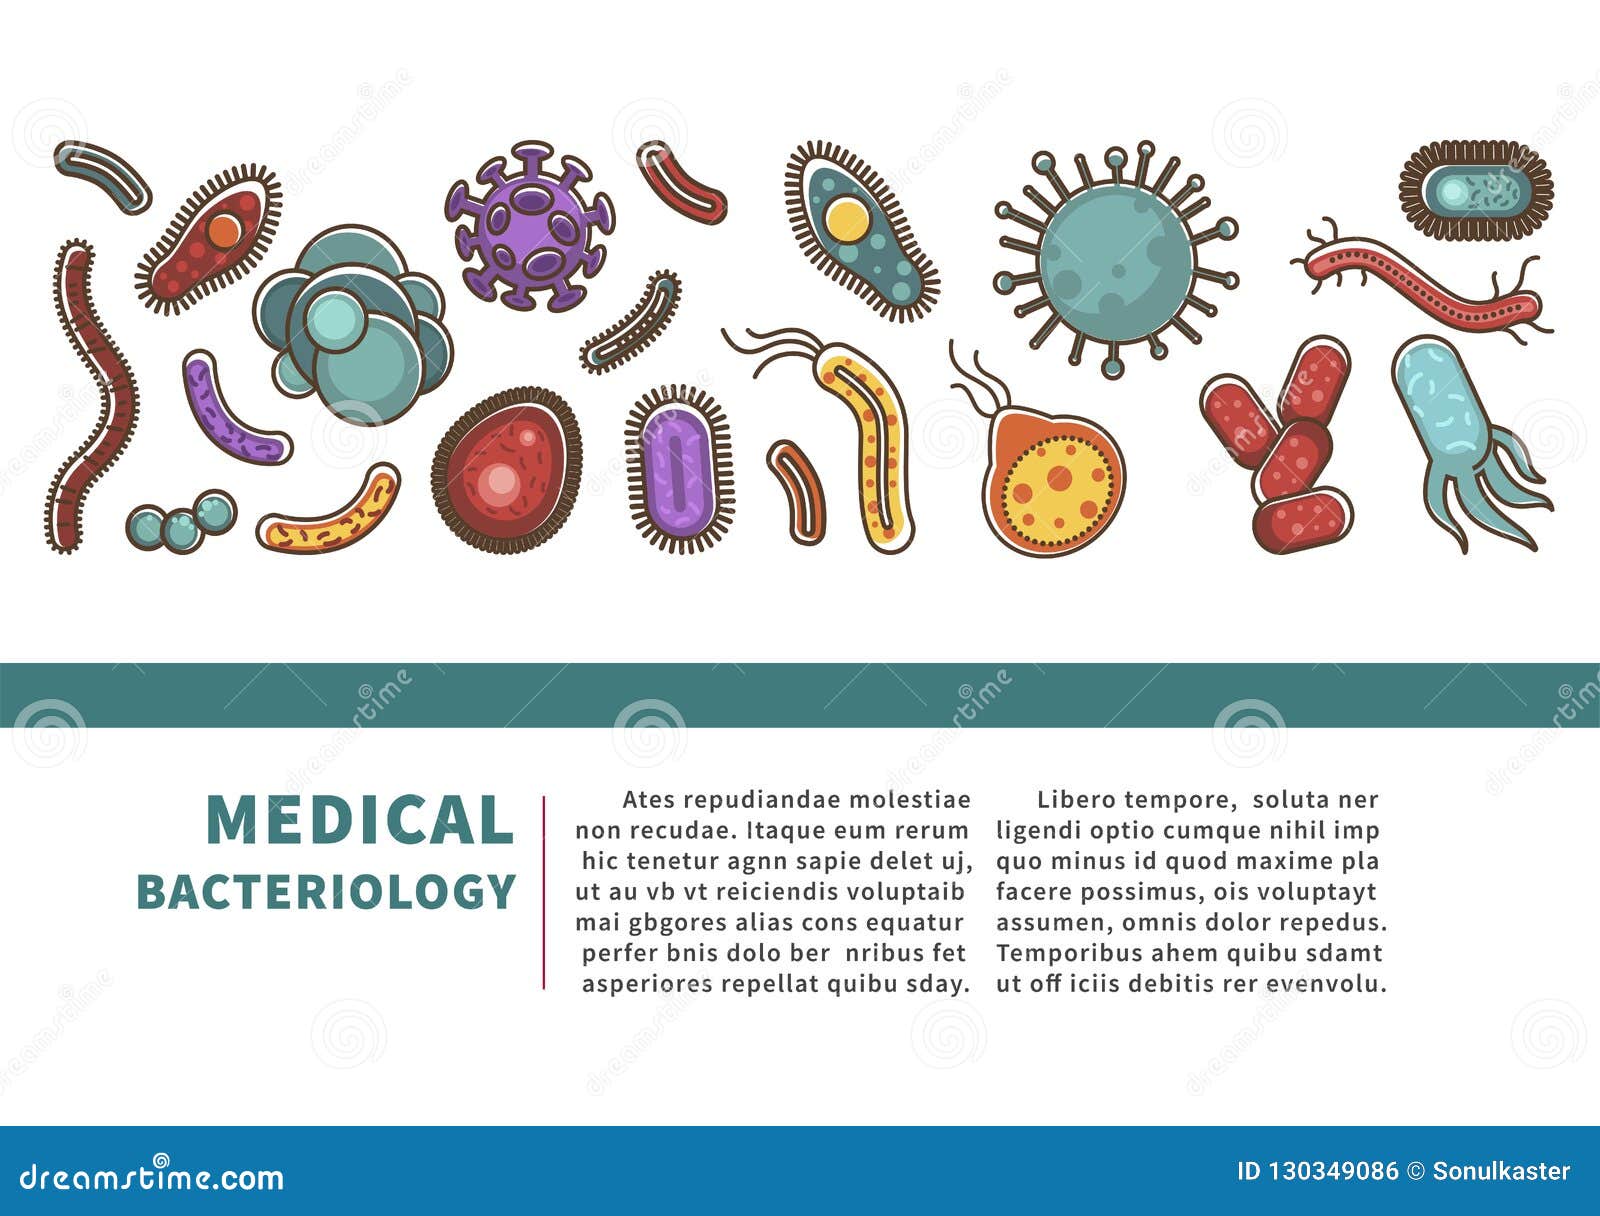 viruses and bacteria information poster for medical healthcare infographics or bacteriology science.